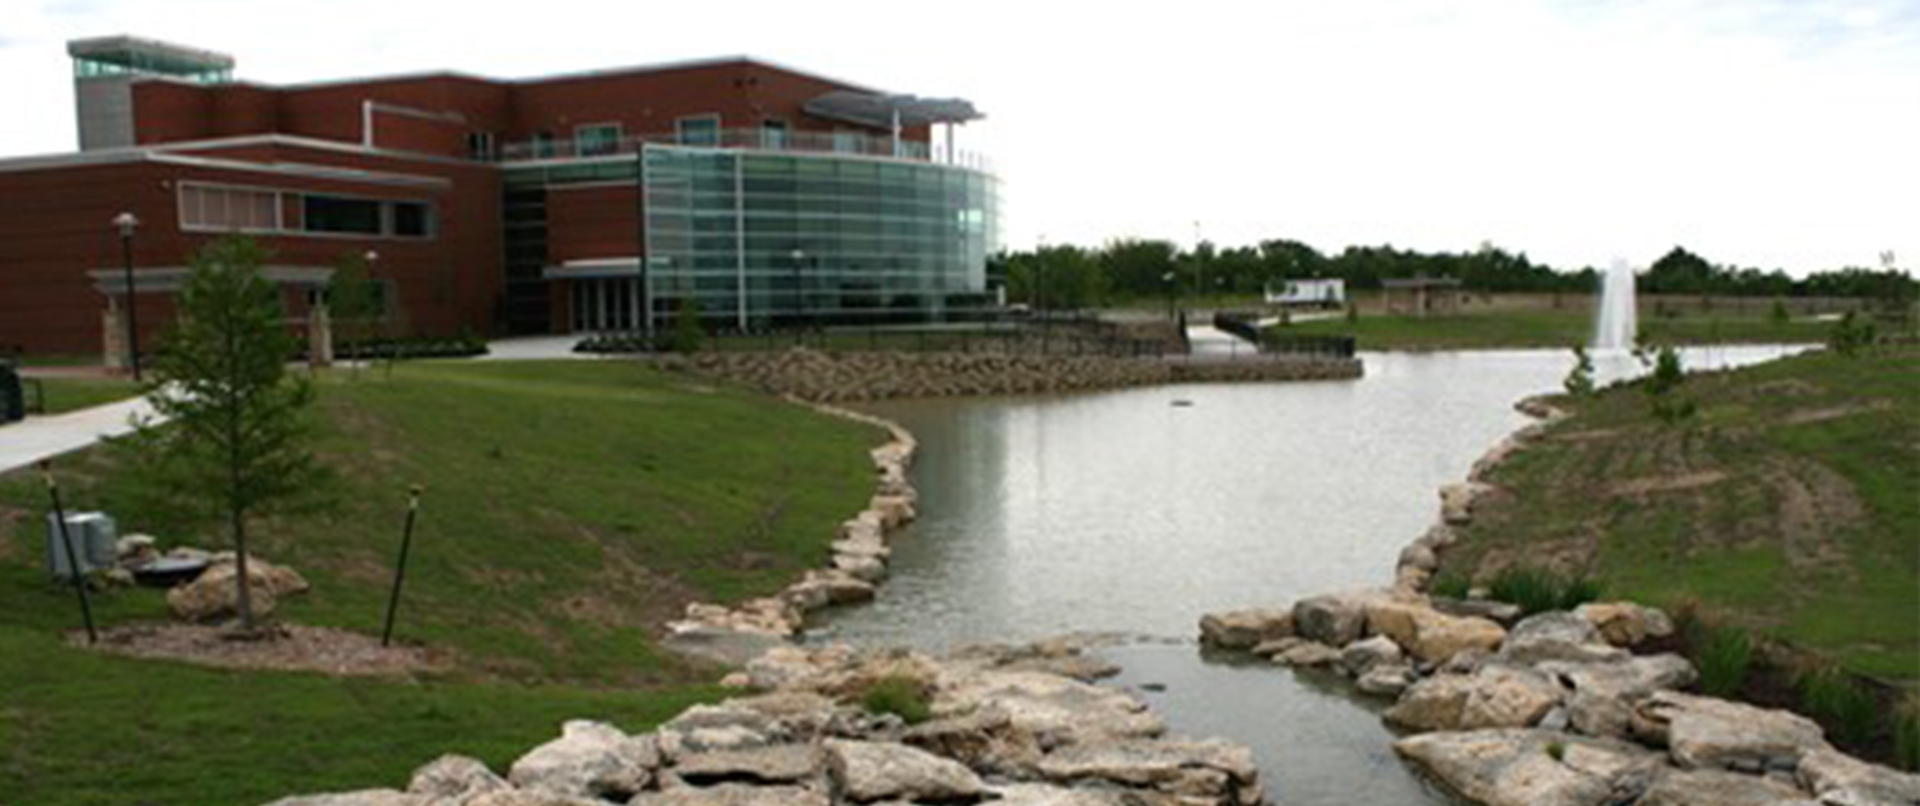 View of Pond and Glenpool Convention Center 